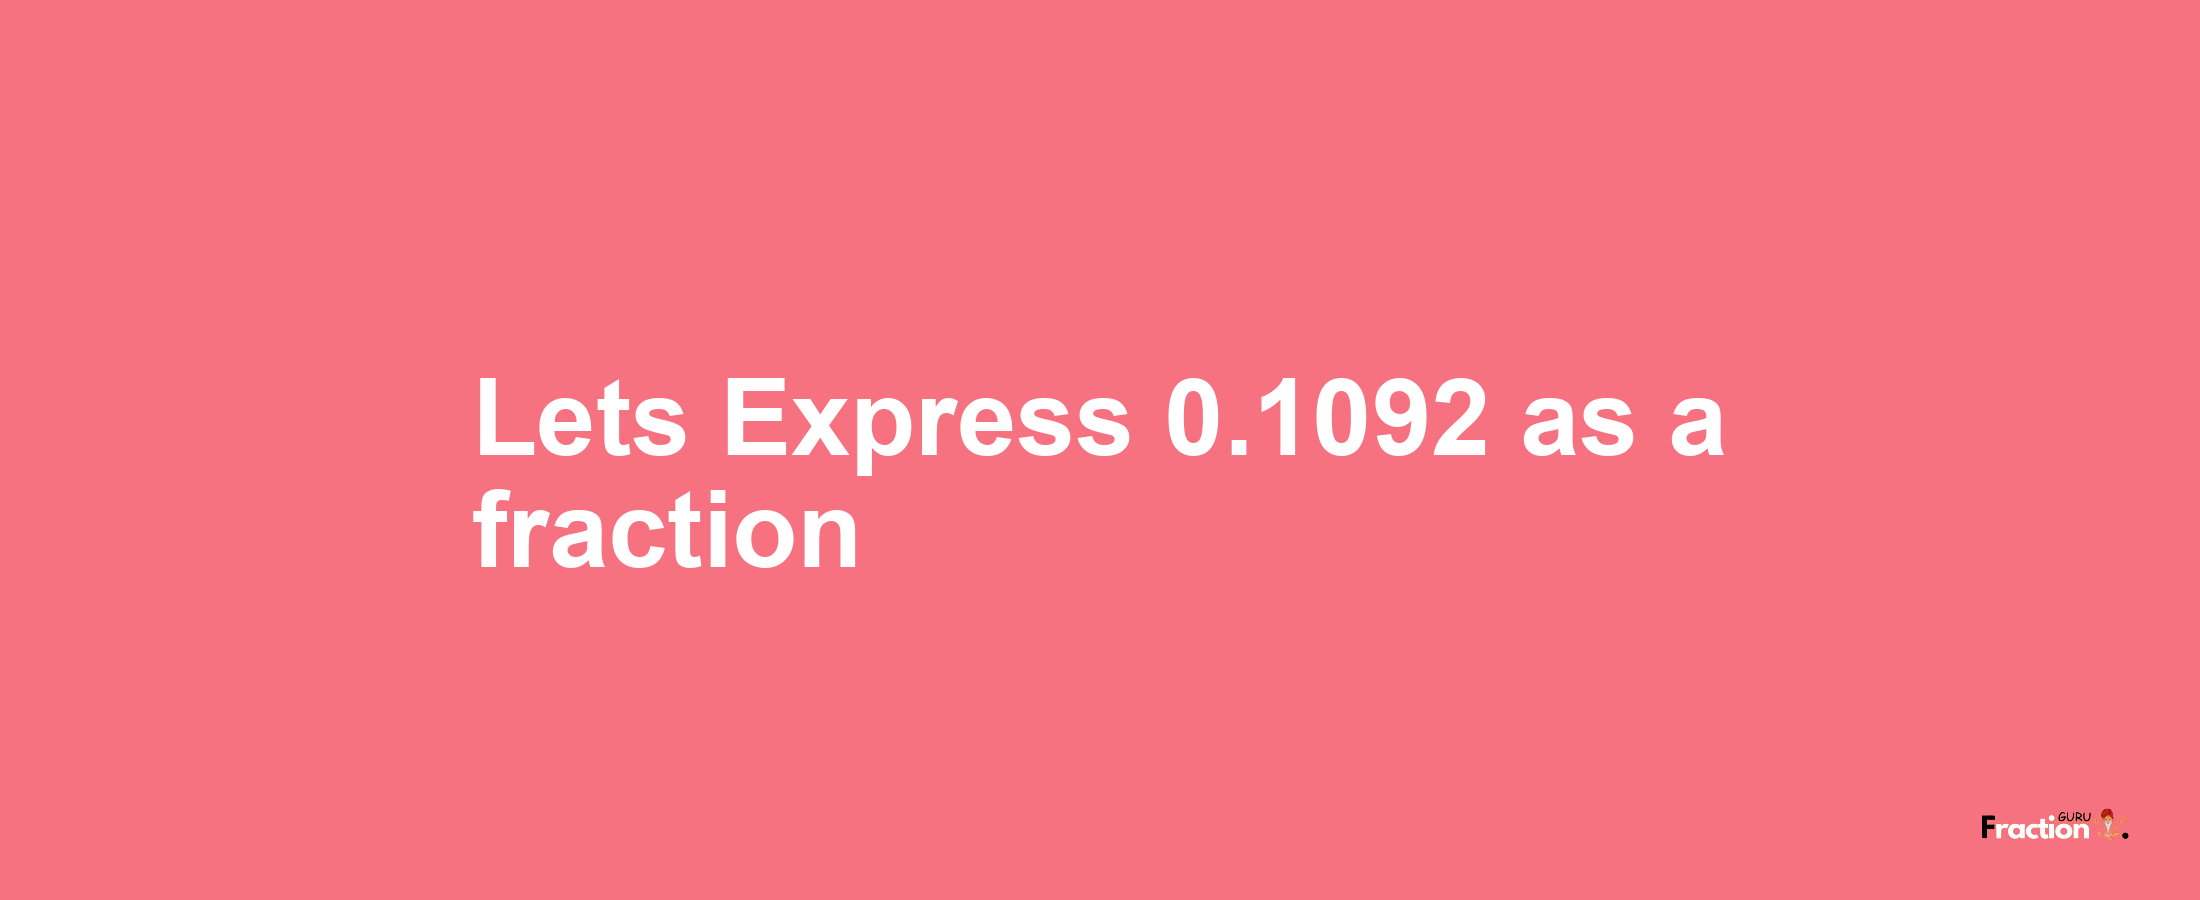 Lets Express 0.1092 as afraction